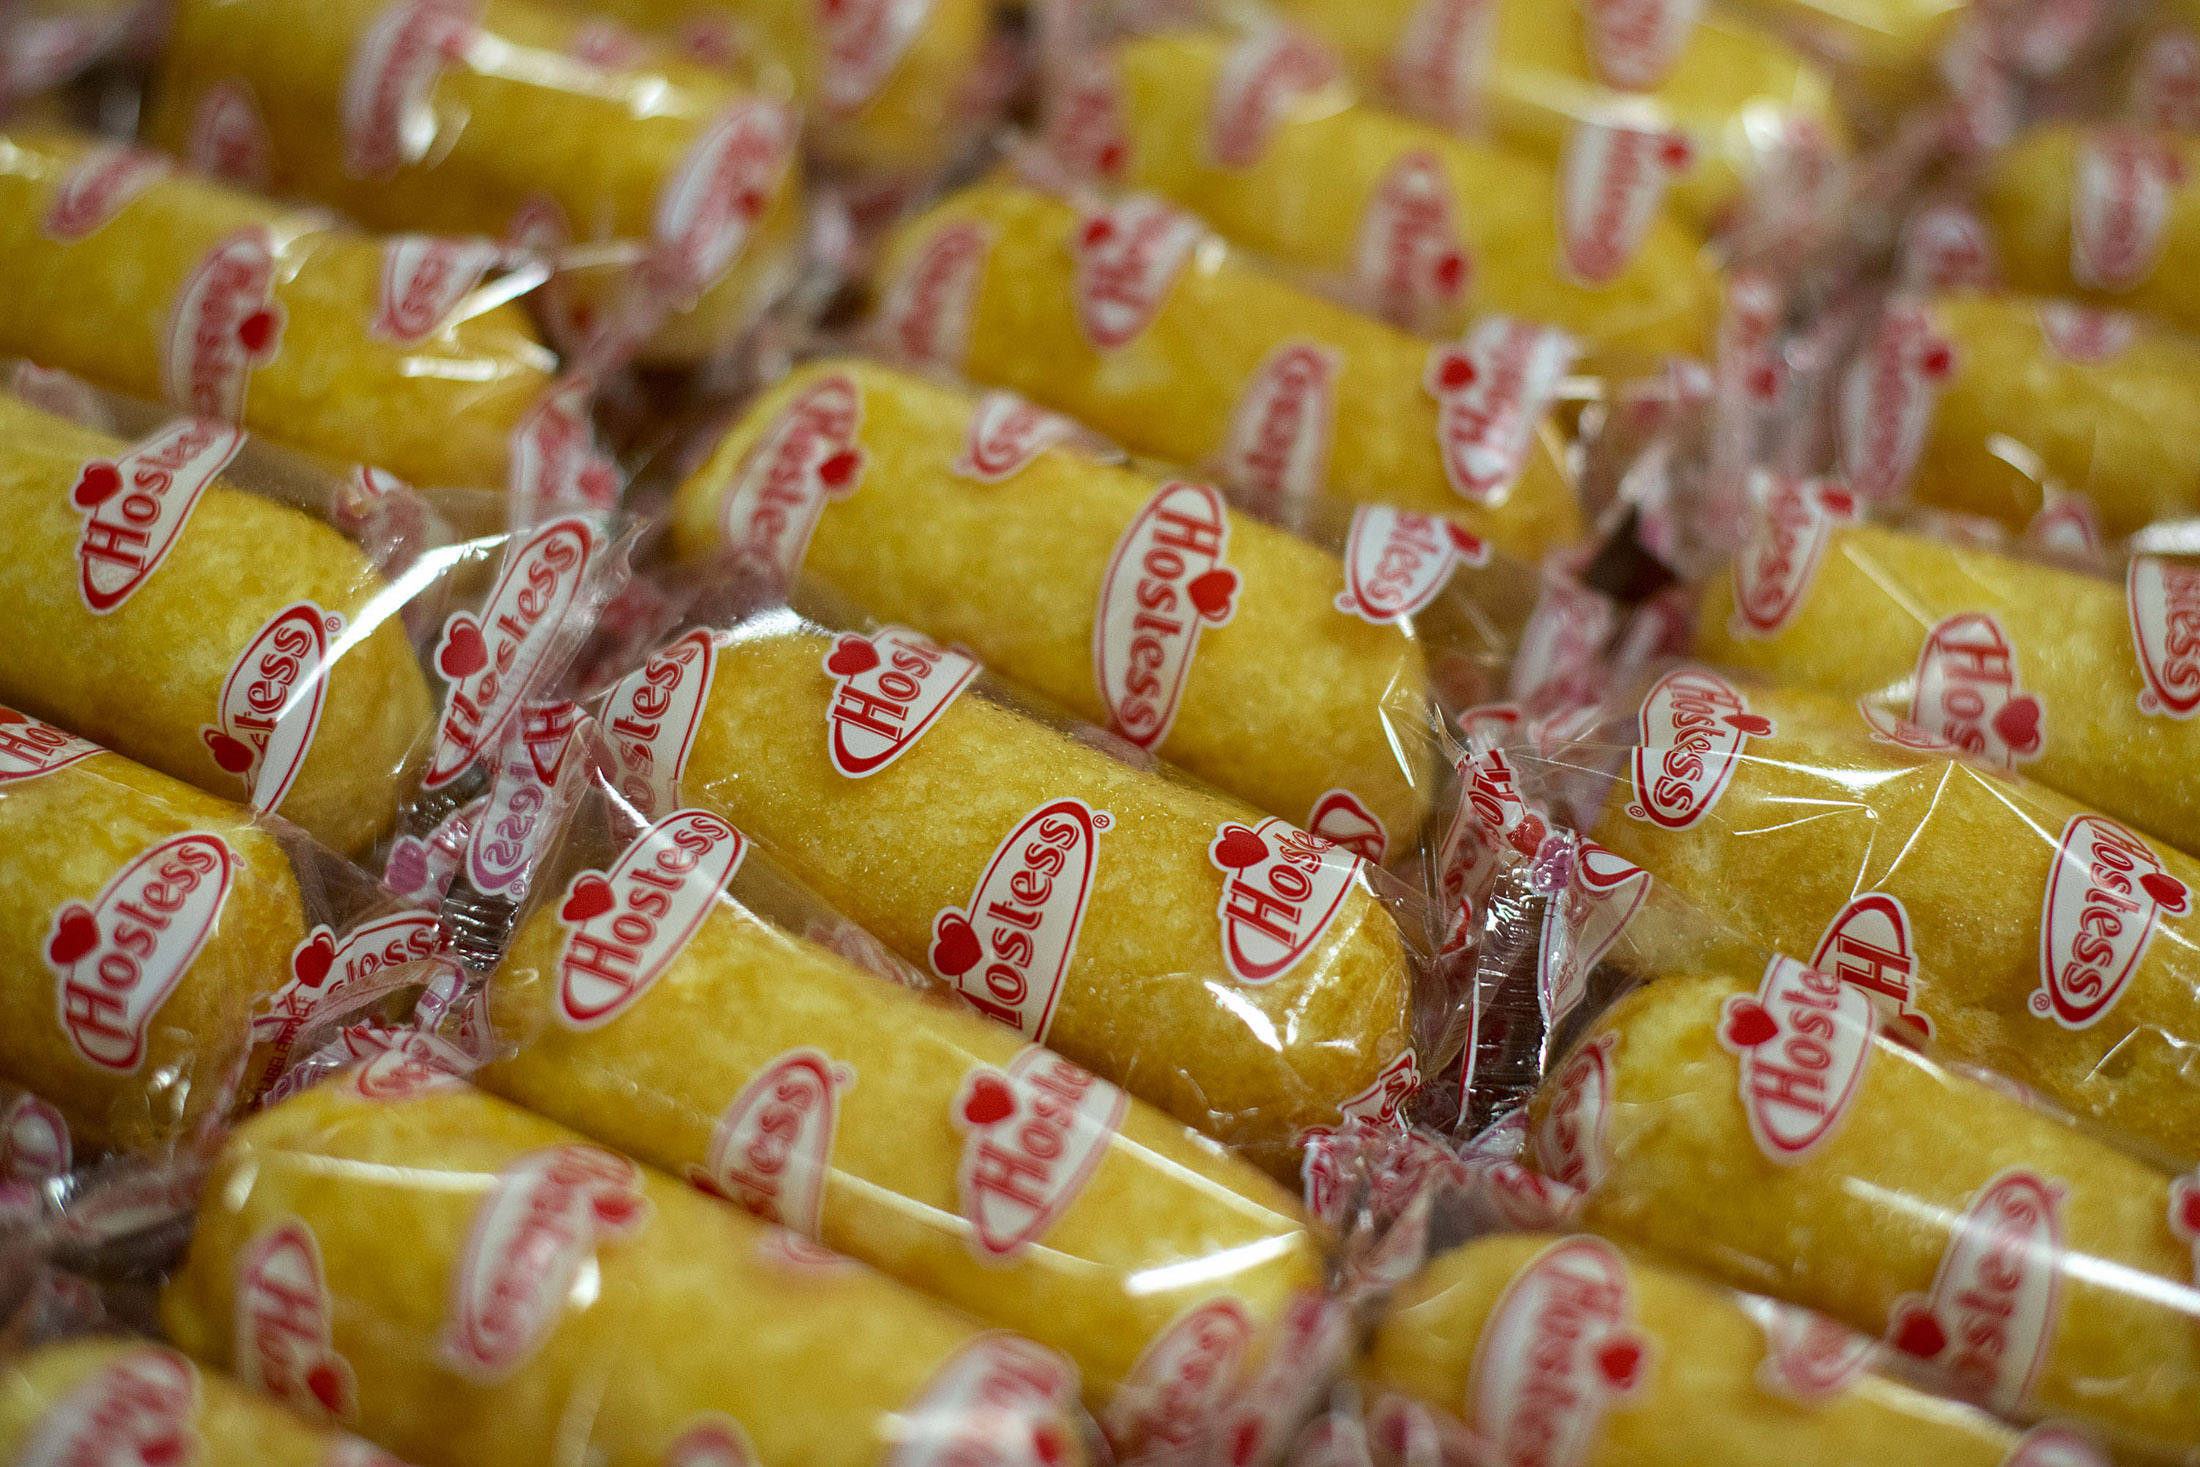 Hostess Brands LLC Twinkies snack cakes sit in a tray in the packaging area of a Hostess bakery in Schiller Park, Illinois, U.S., on Monday, July 15, 2013. Hostess Brands LLC officially revives sales of the iconic Twinkie snack cake today, following a seven-month hiatus after the original company decided to liquidate under bankruptcy.
